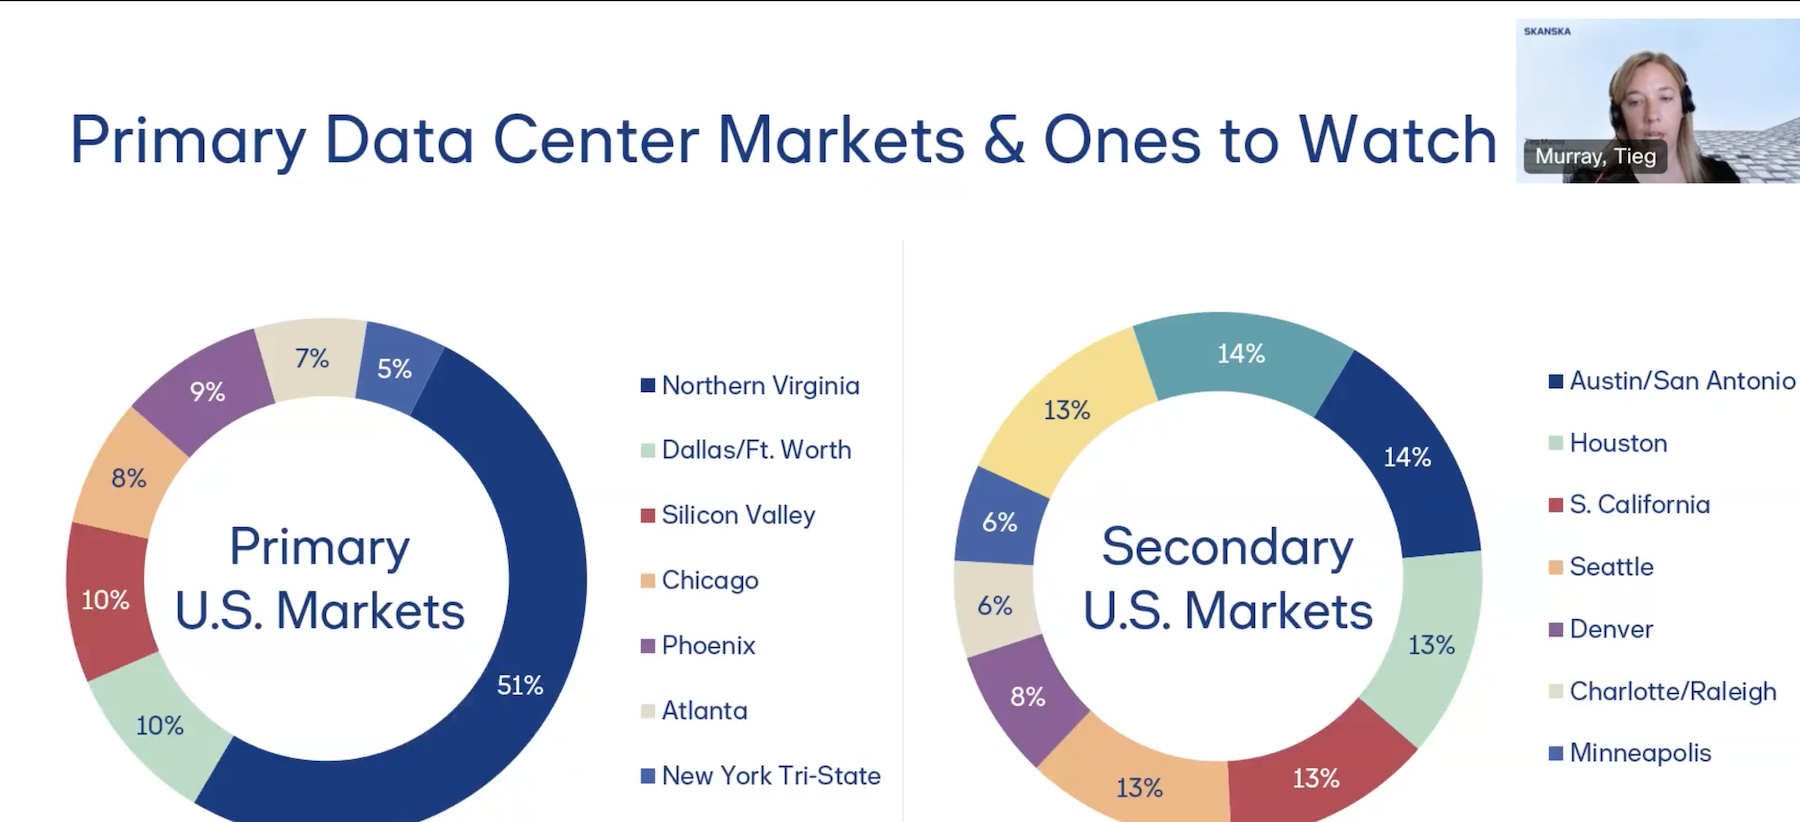 Secondary markets for data centers are expanding their demand